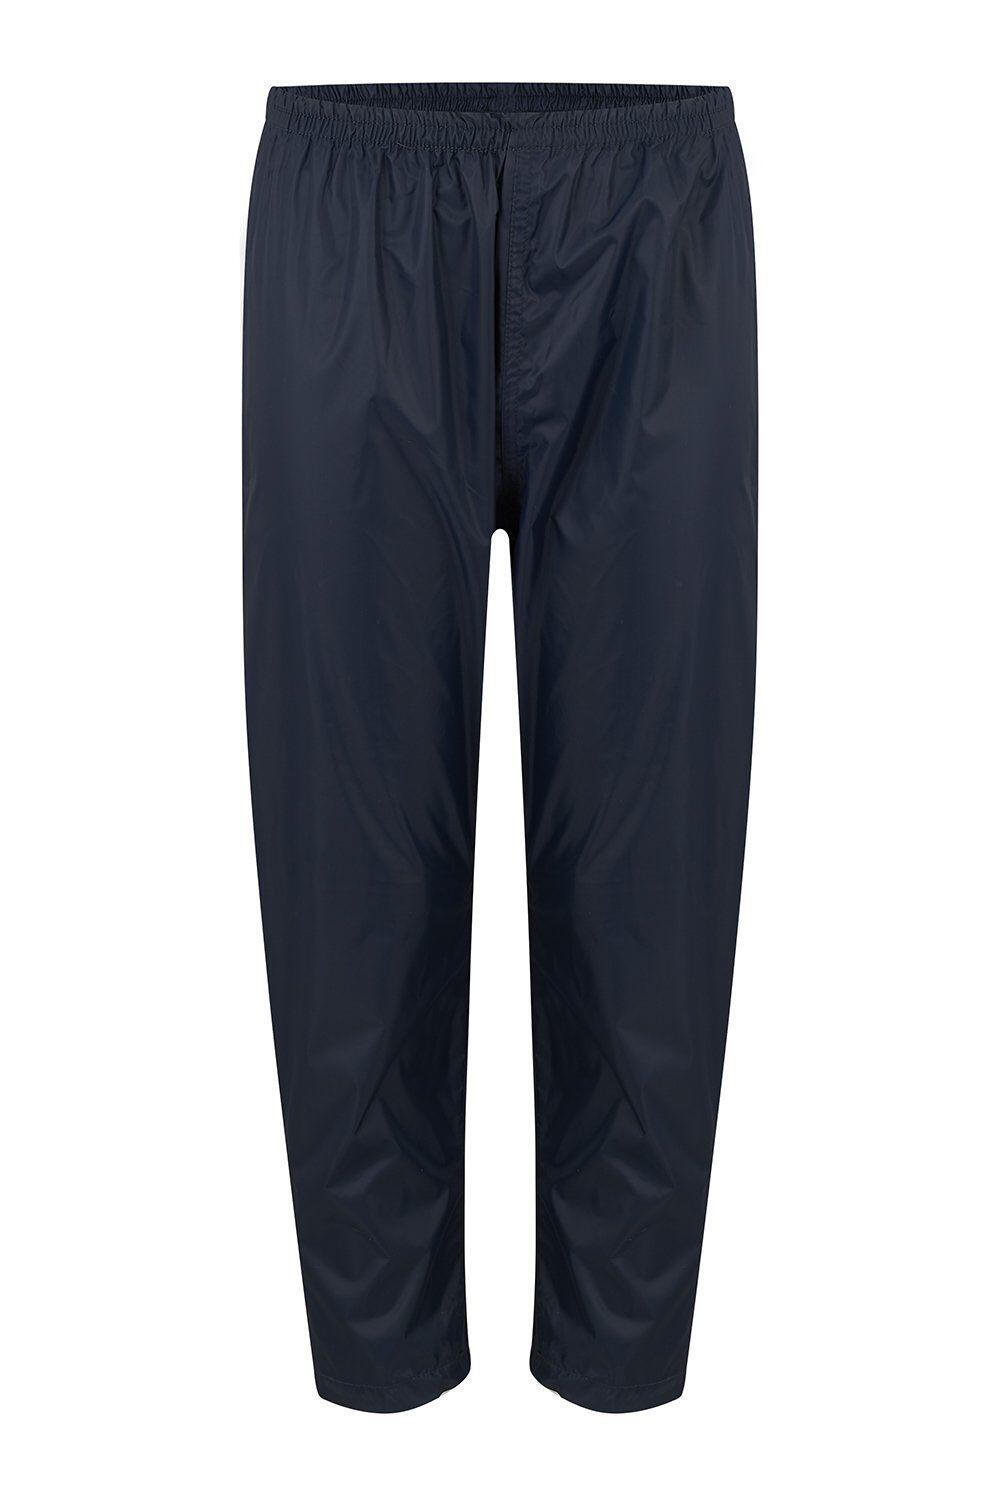 MAC IN A SAC Kids Packable Waterproof Overtrousers